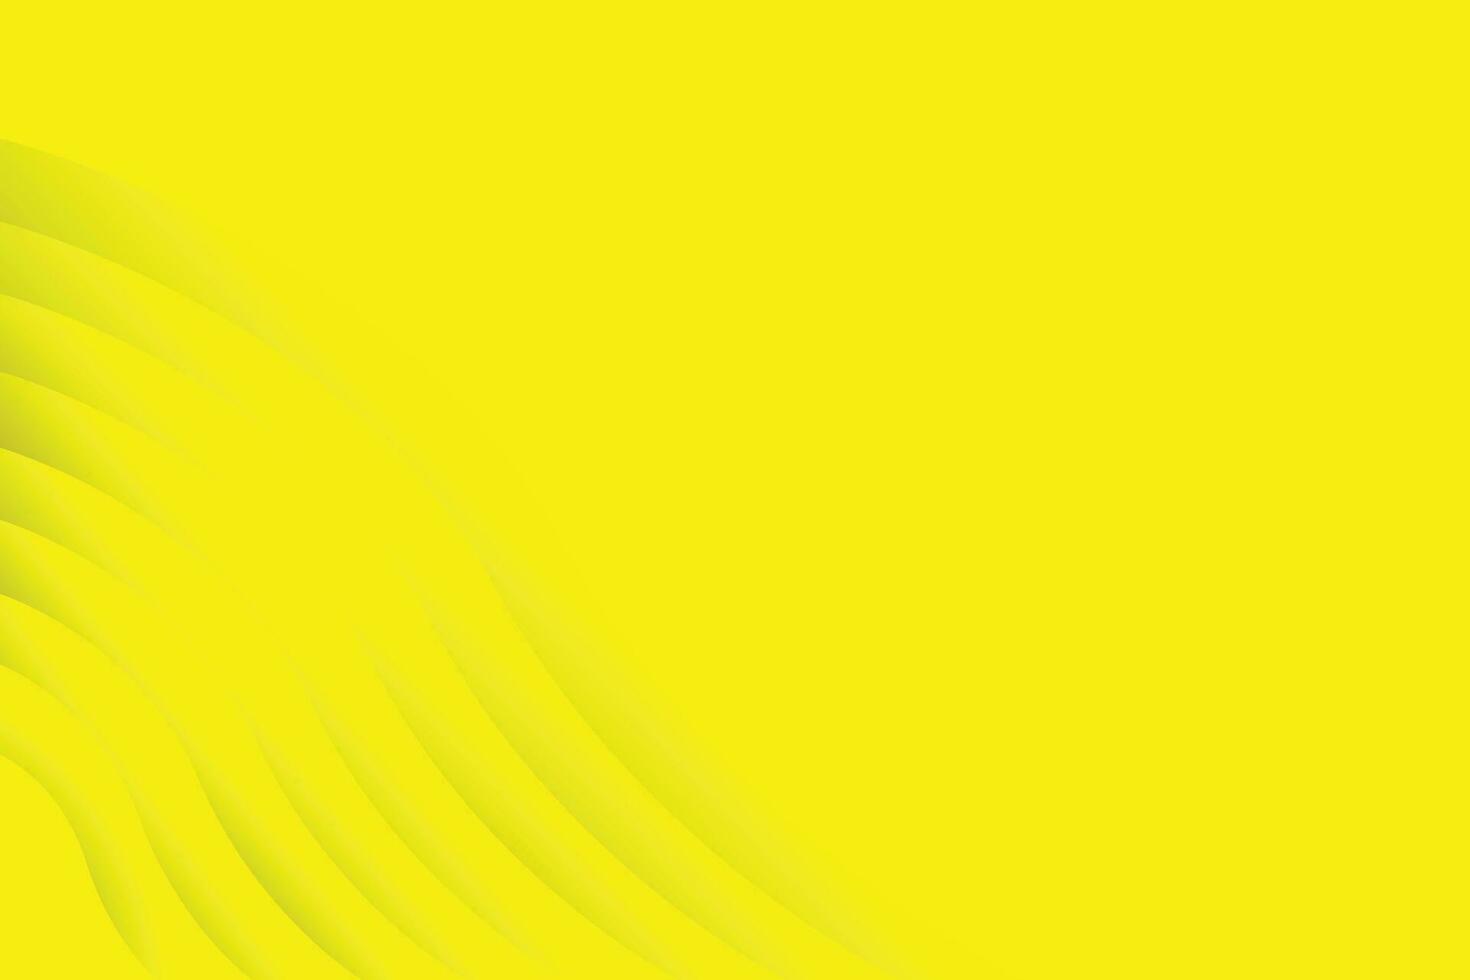 yellow color wave background design . vector